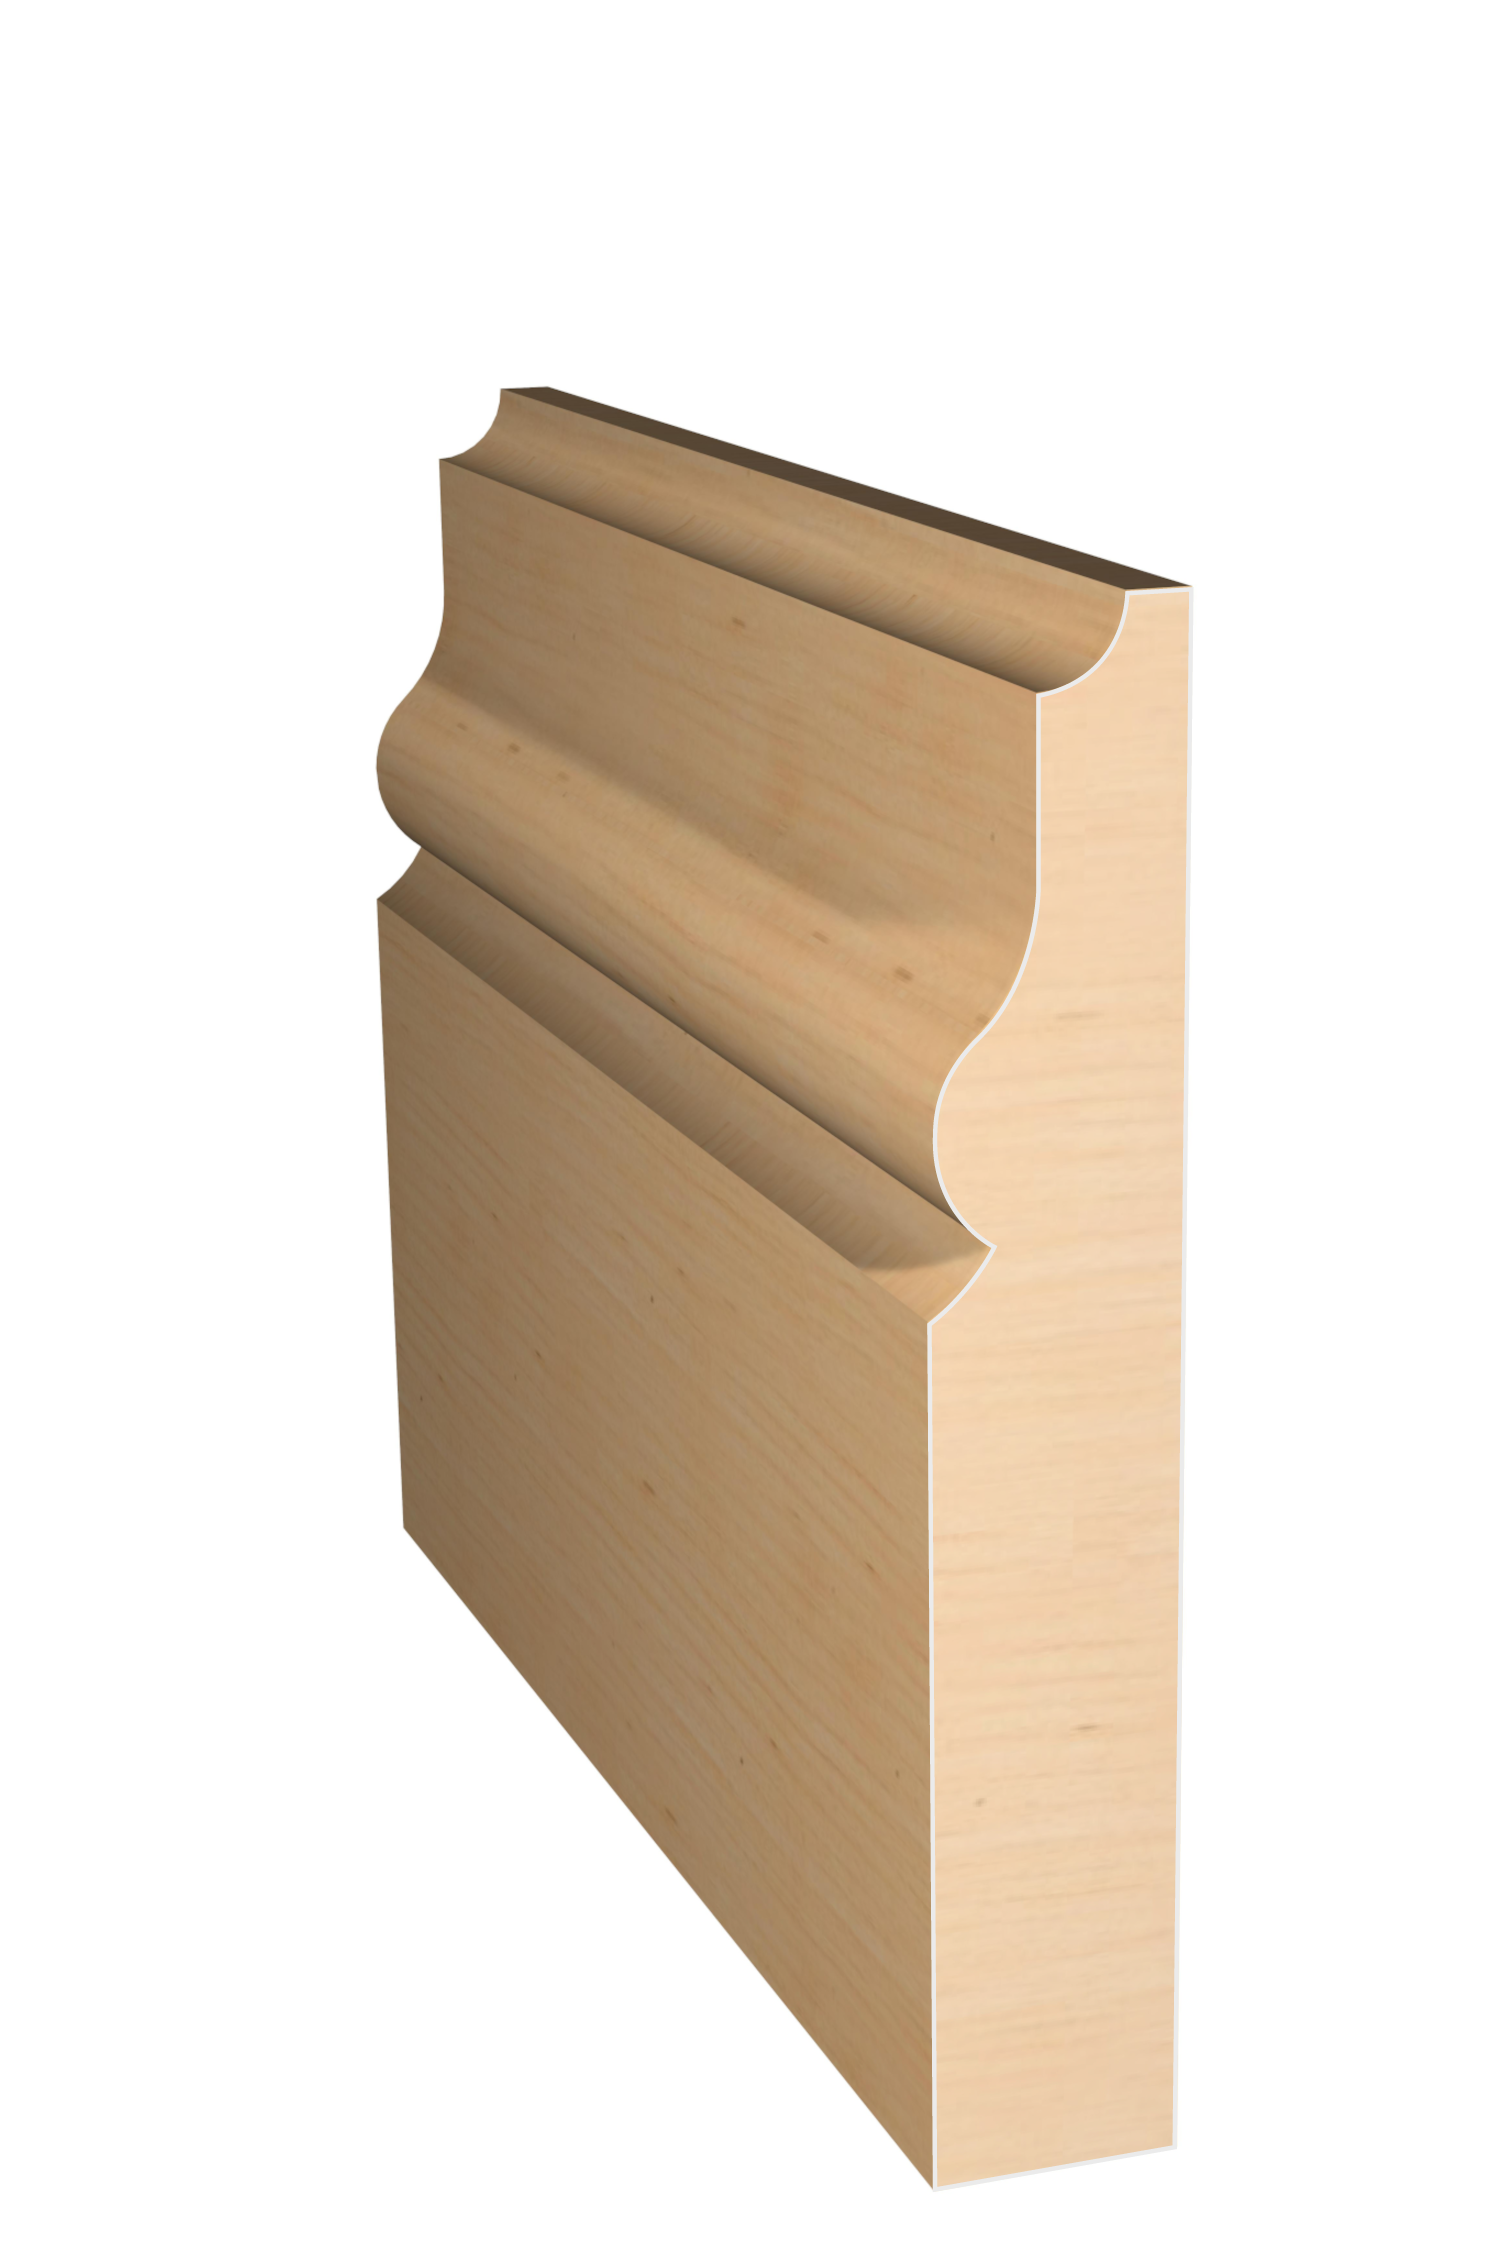 Three dimensional rendering of custom base wood molding BAPL4123 made by Public Lumber Company in Detroit.